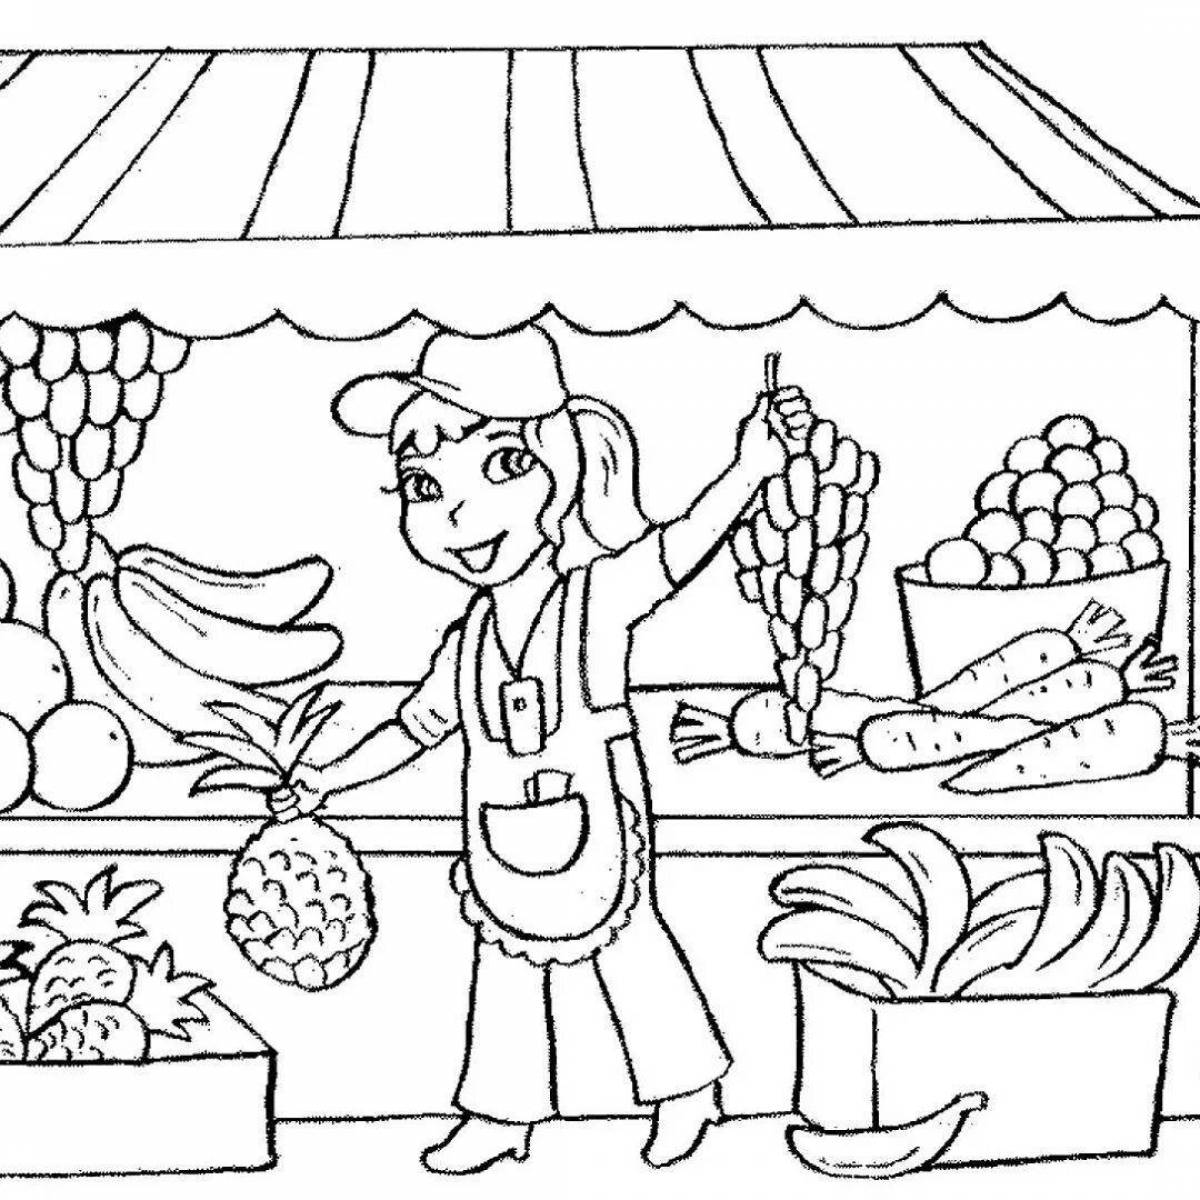 Animated student coloring page